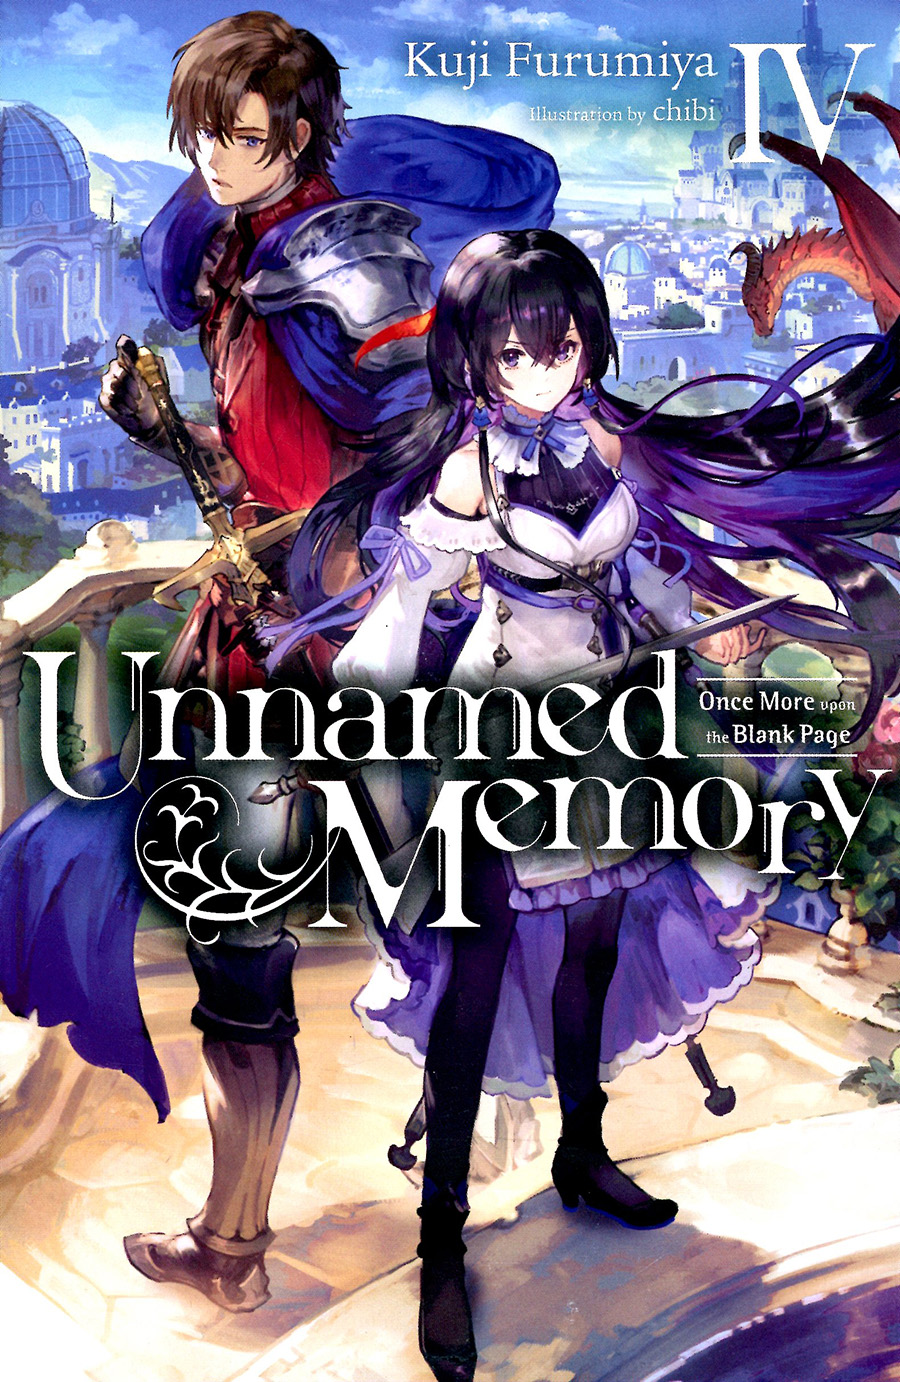 Unnamed Memory Light Novel Vol 4 Once More Upon The Blank Page SC